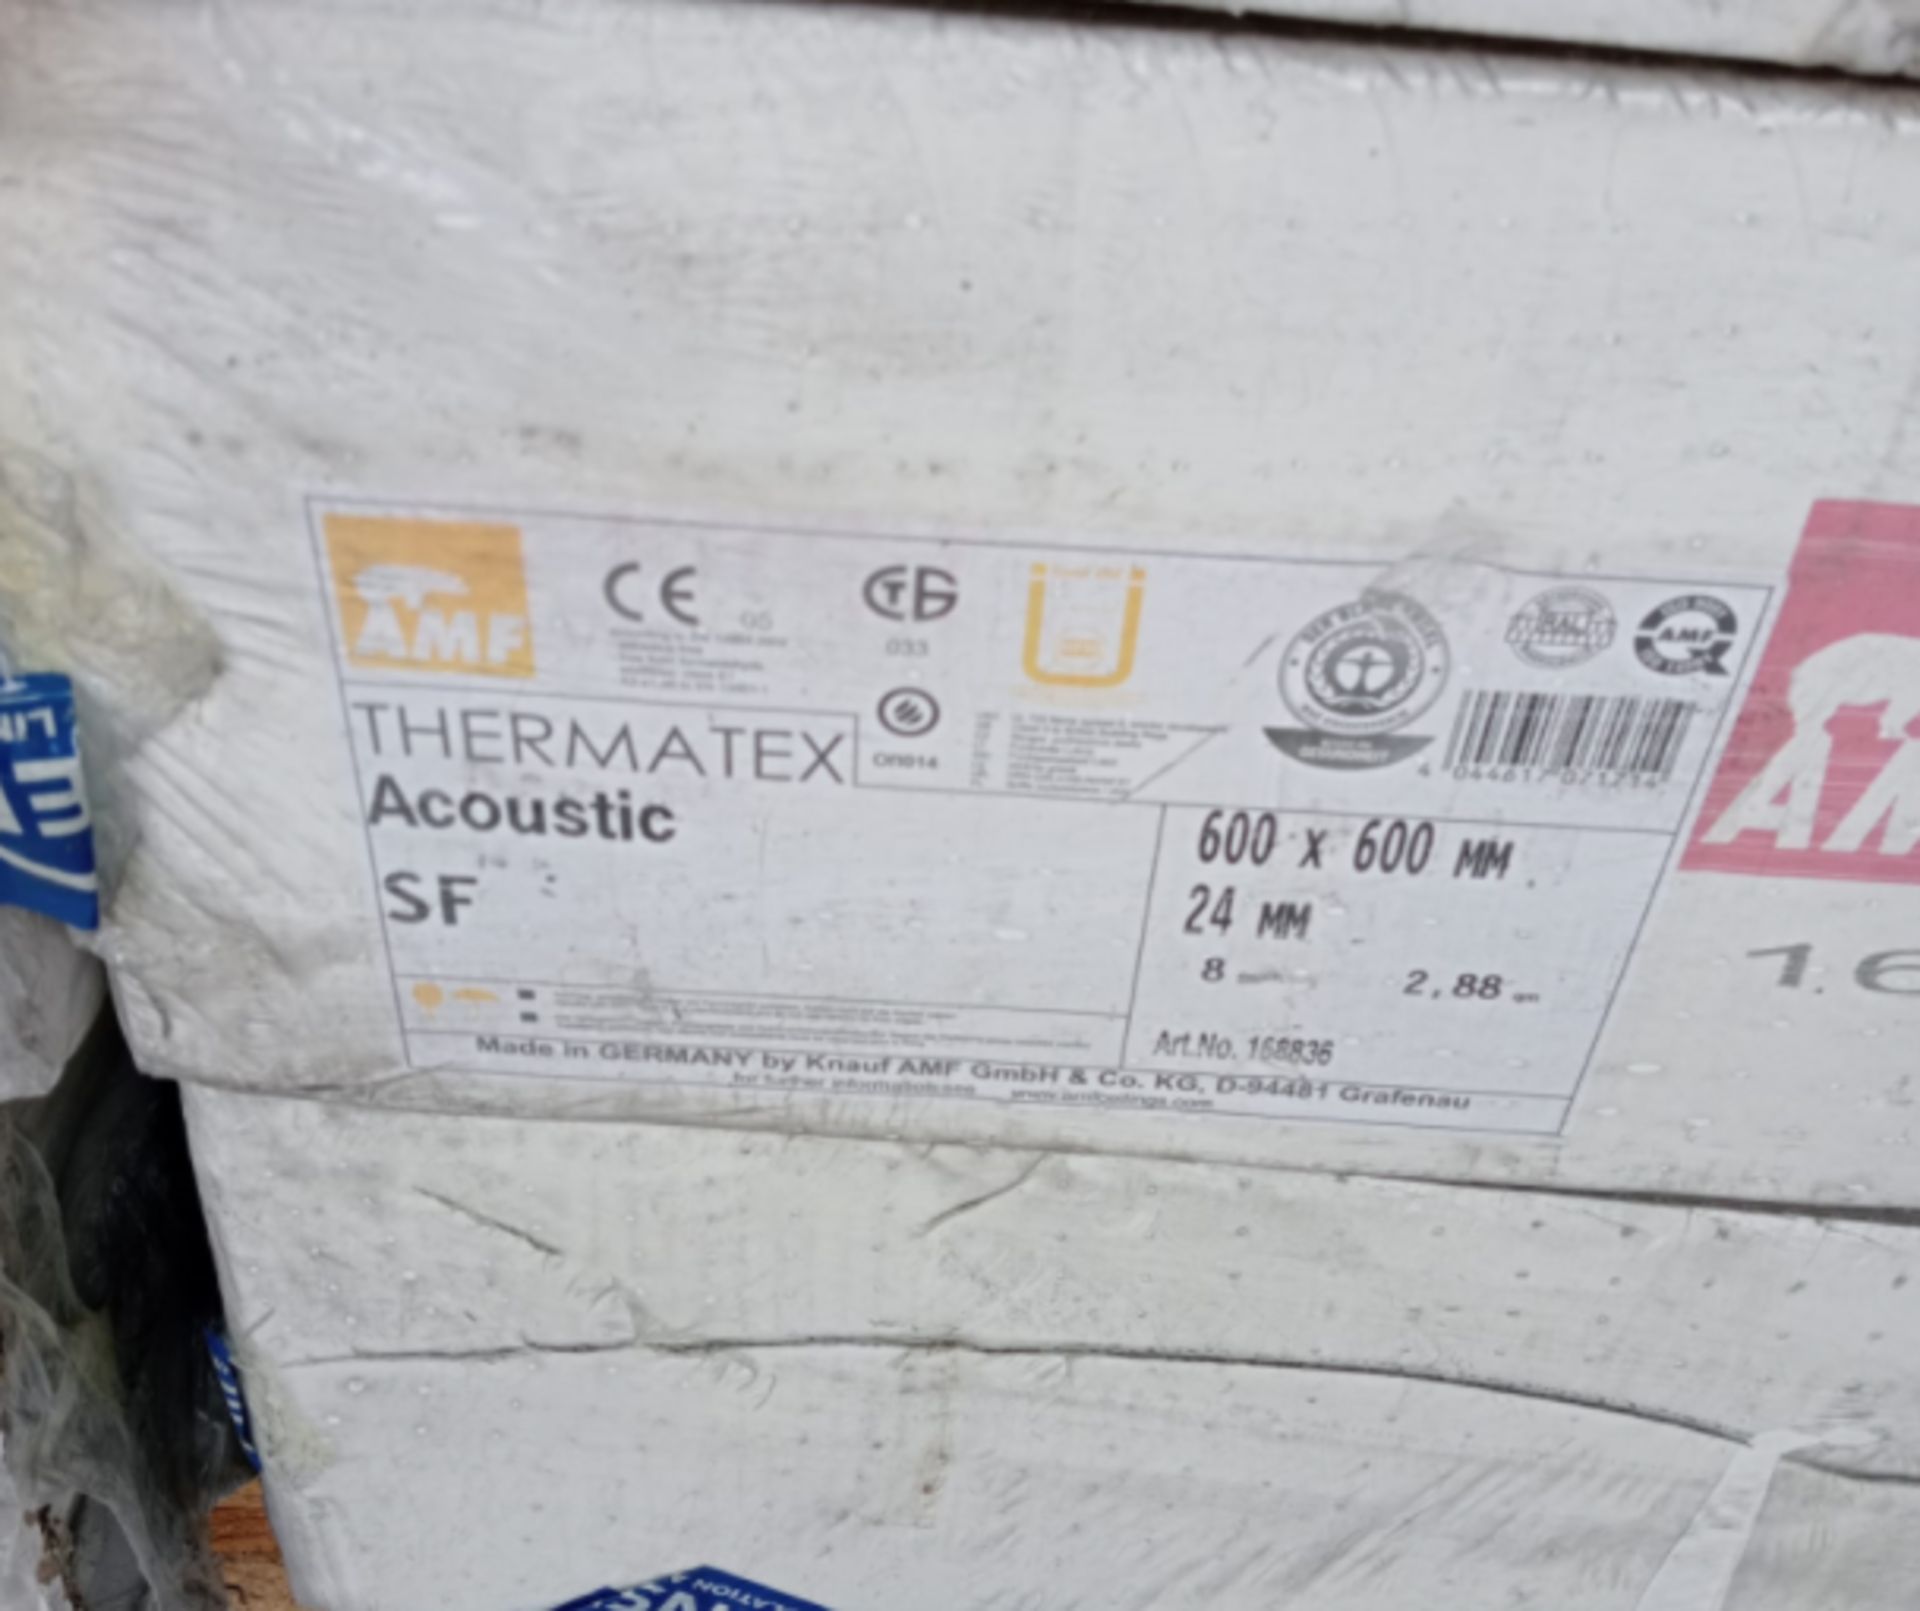 JOBLOT OF 12 BOXES THERMATEX SF ACOUSTIC CEILING TILES EDGE 600 X 600 X 24MM - GRADE B - Image 3 of 3